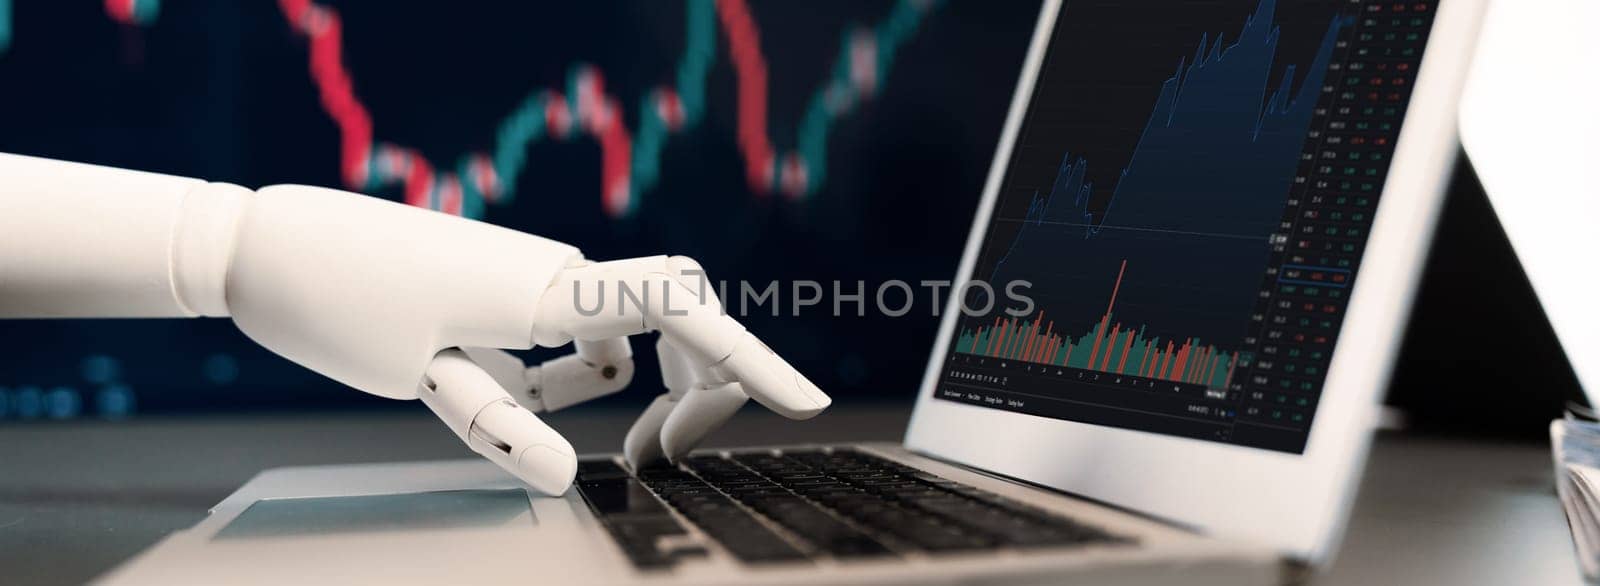 Automated stock trading concept. Robotic hand analyzing financial data on stock exchange, artificial intelligence utilization to predict precise price change in stock market. Trailblazing